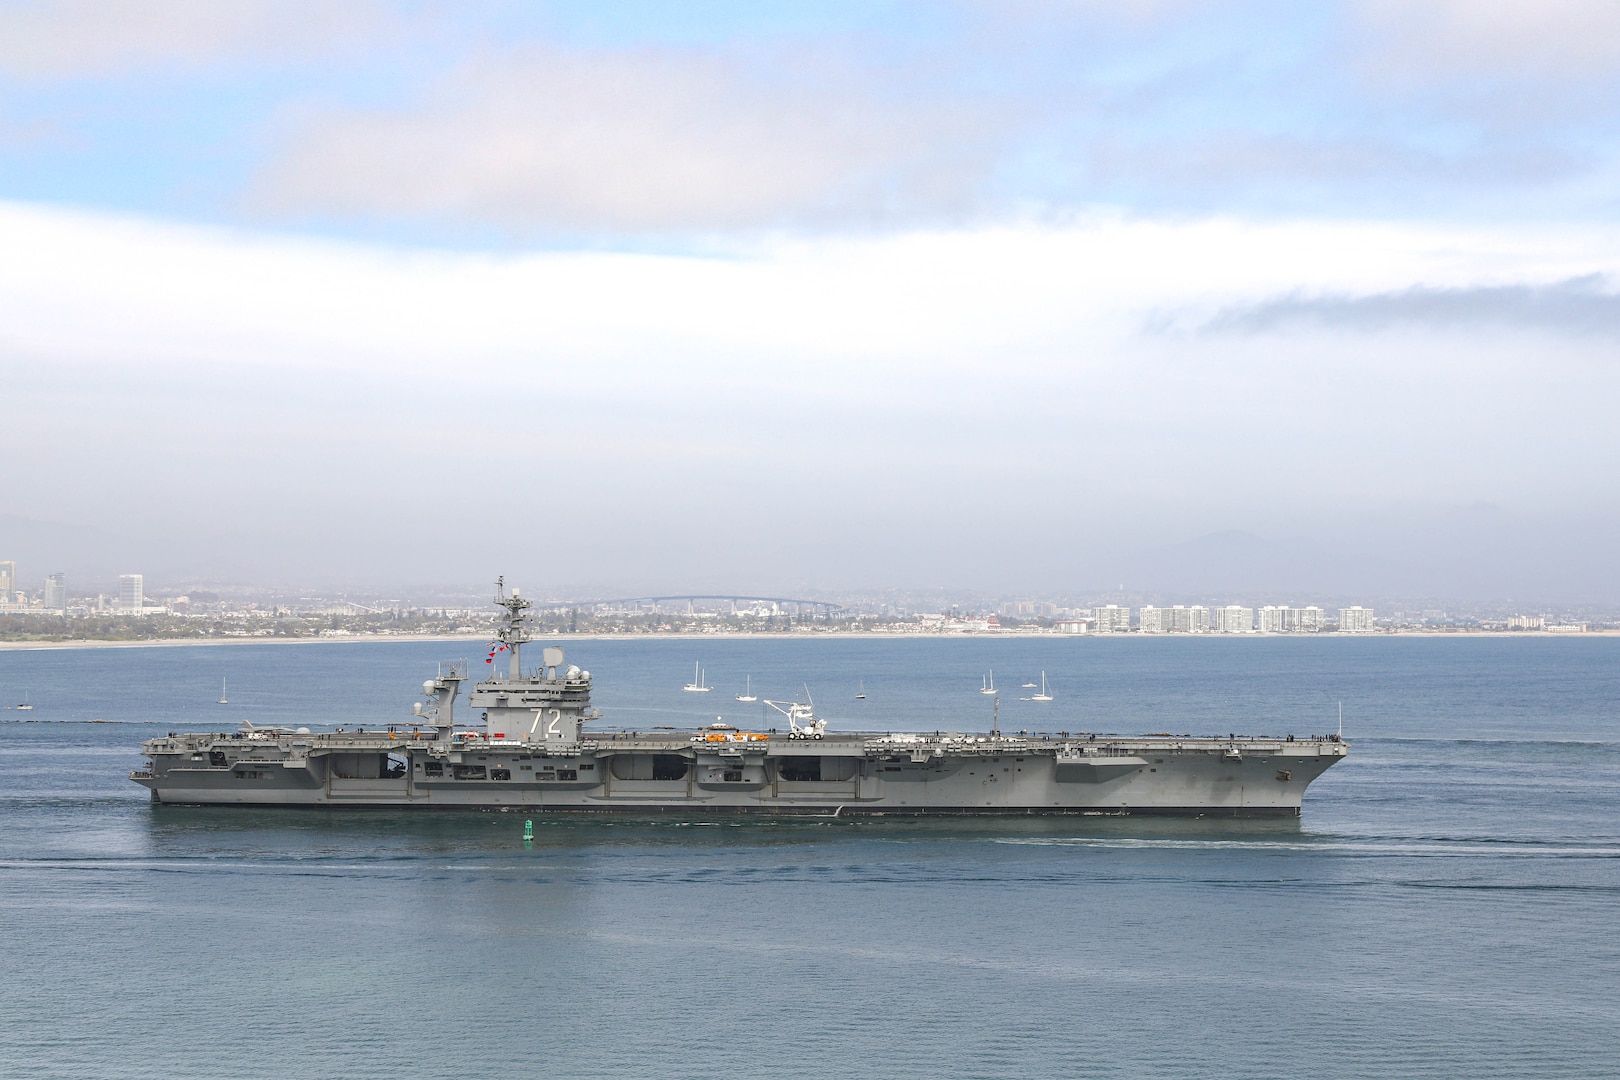 USS Abraham Lincoln (CVN 72) departs San Diego April 5, 2021, headed out to sea trials after undergoing a seven-month Planned Incremental Availability at Puget Sound Naval Shipyard & Intermediate Maintenance Facility's San Diego Detachment. Lincoln successfully completed sea trials April 7, 2021. (PSNS & IMF photo by Robin Lee)